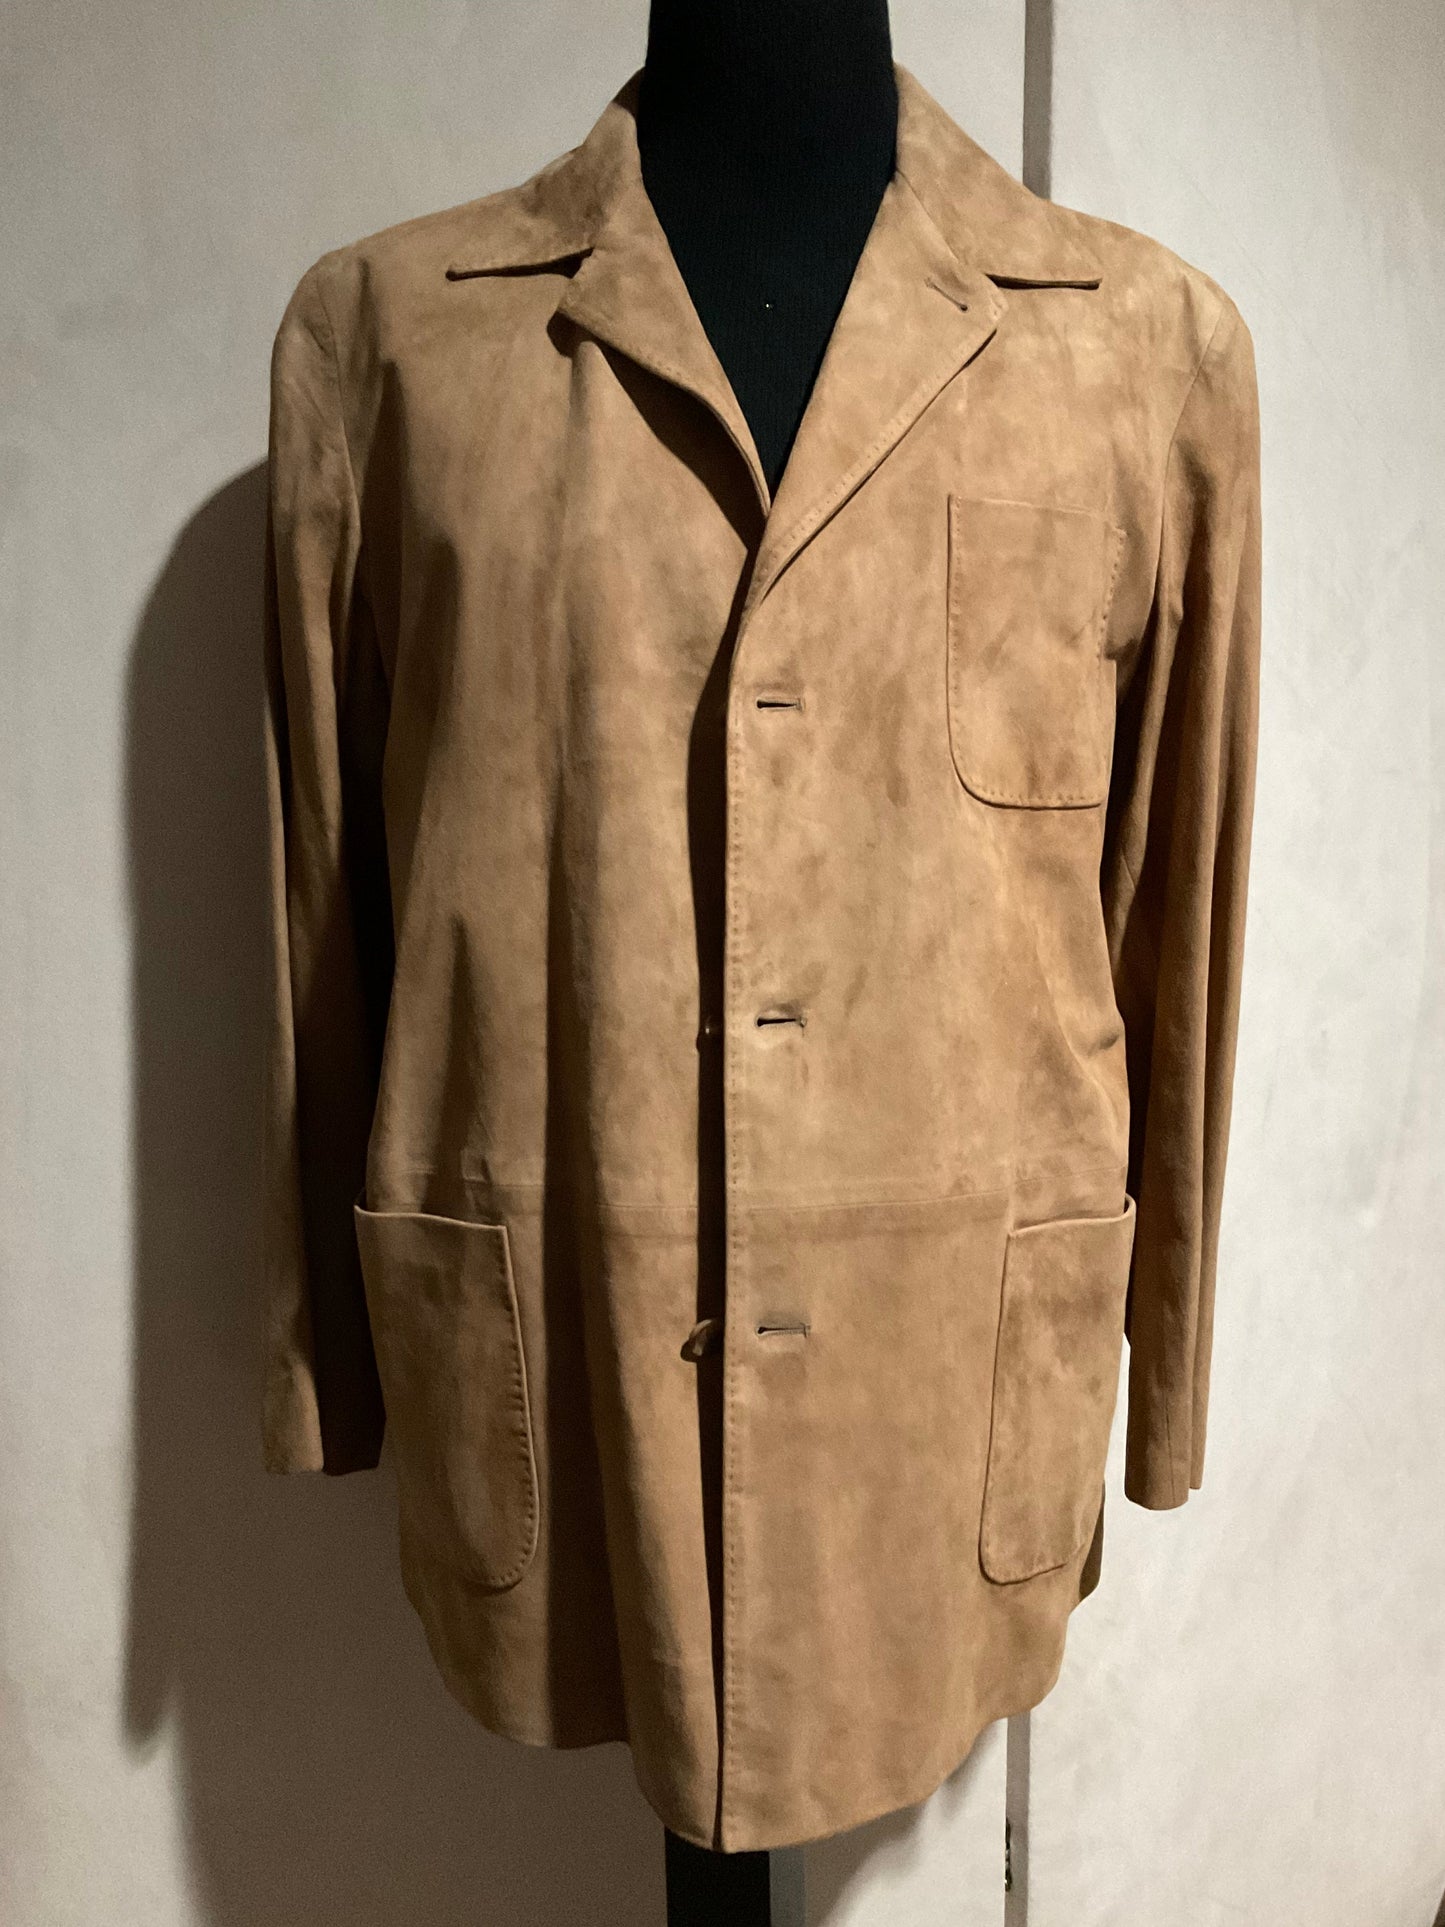 R P SUEDE JACKET / MEDIUM -LARGE / BROWN / NEW / MADE IN ITALY